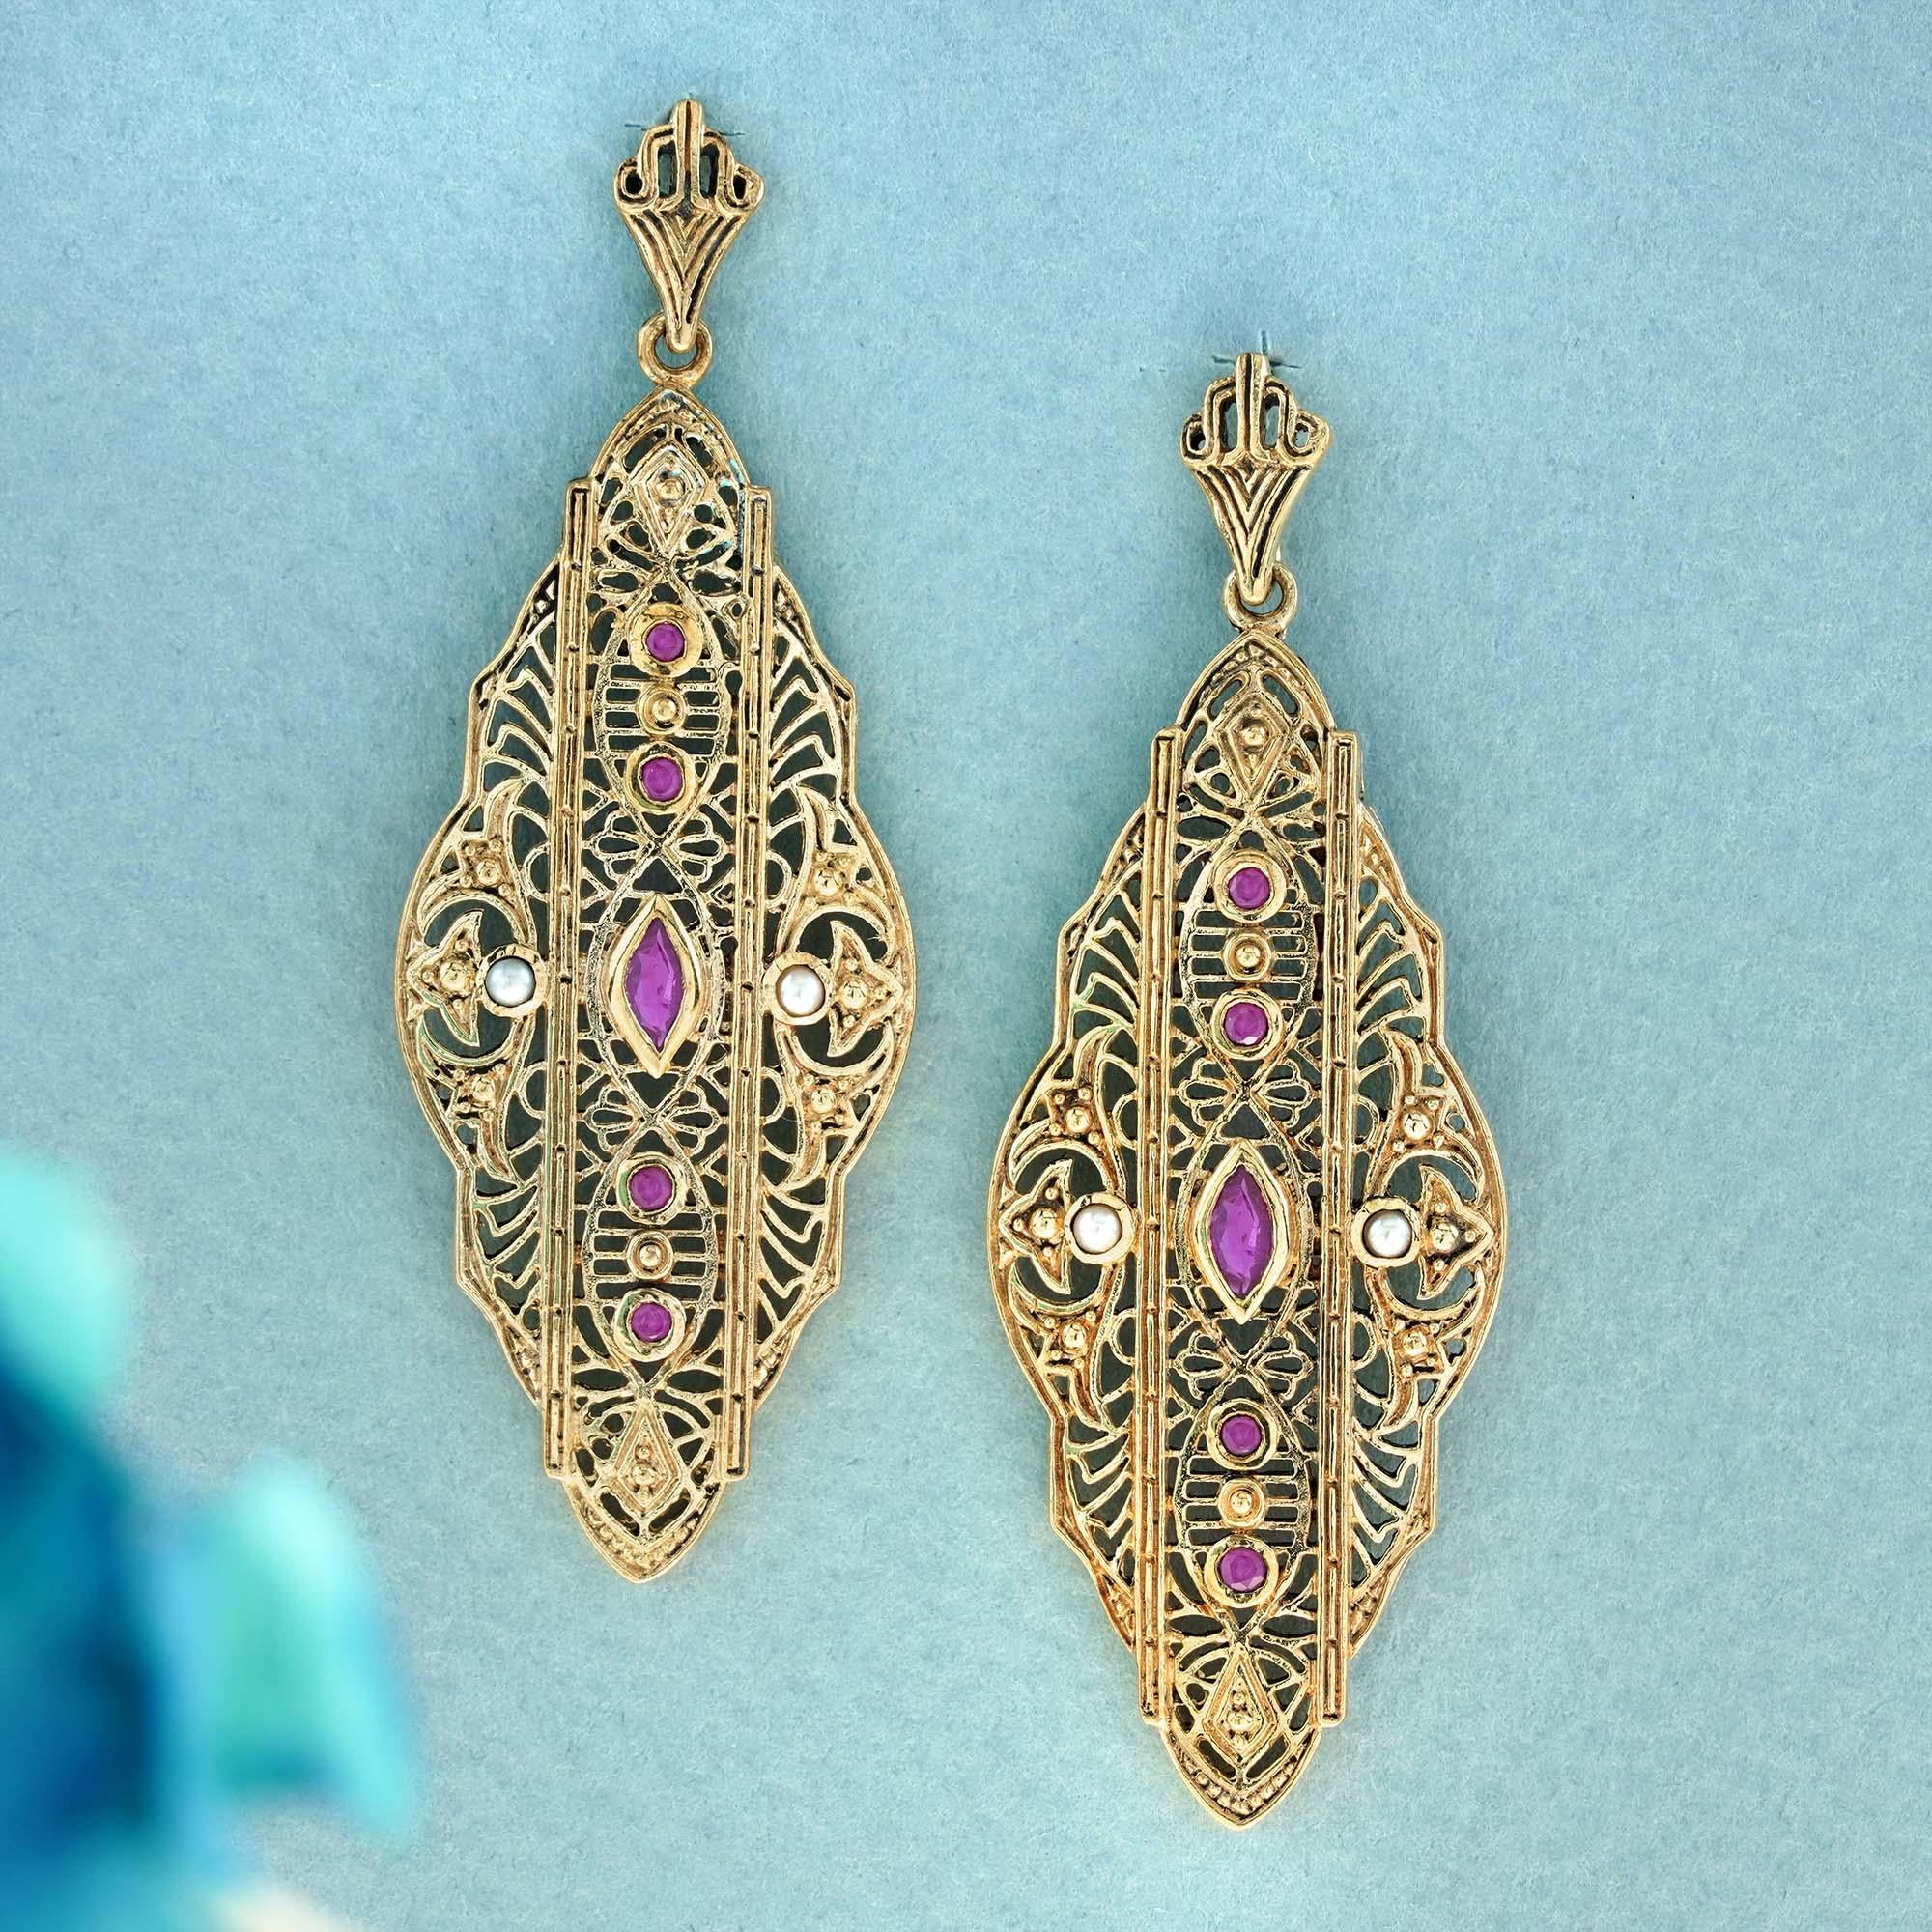 Delight in the captivating blend of red, white, and gold with these mesmerizing vintage-style filigree leaf-inspired earrings, featuring a cascade of five rubies. The enduring allure of the central marquise ruby, flanked by round white pearls on